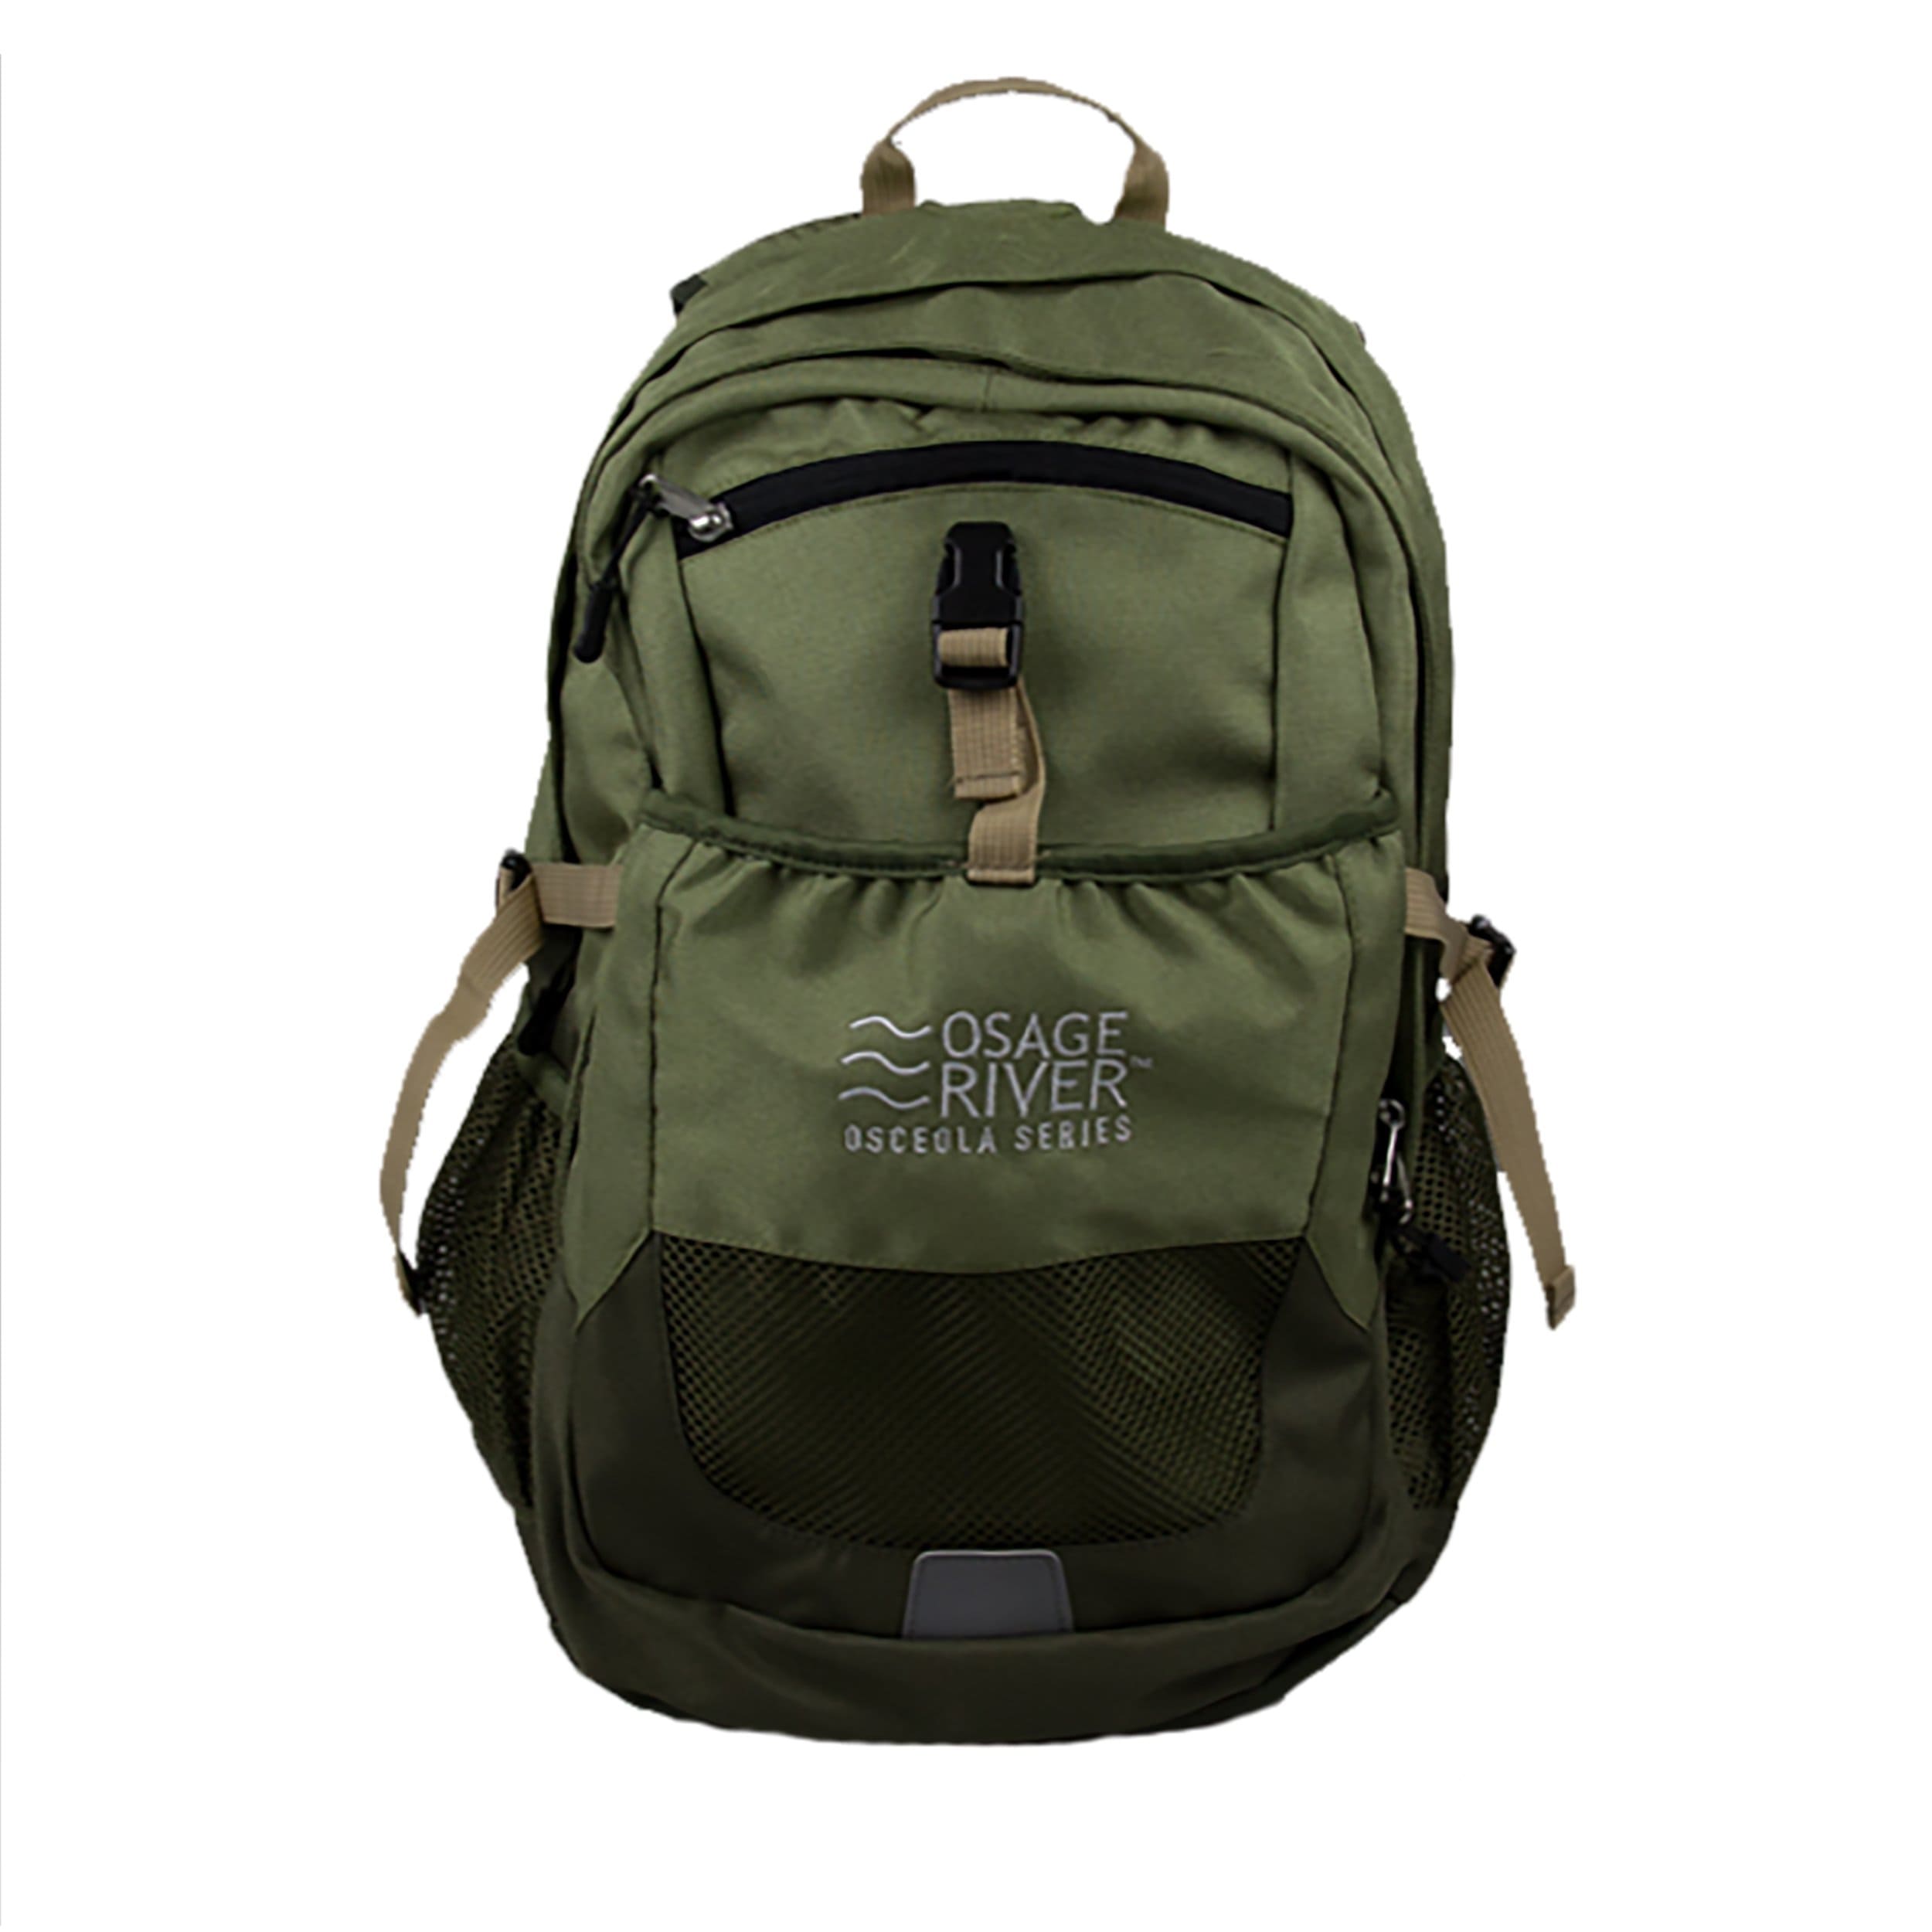 OSAGE RIVER Camping & Outdoor : Sleeping Bags & Cots Osage River Osceola Series Daypack - Olive/Tan